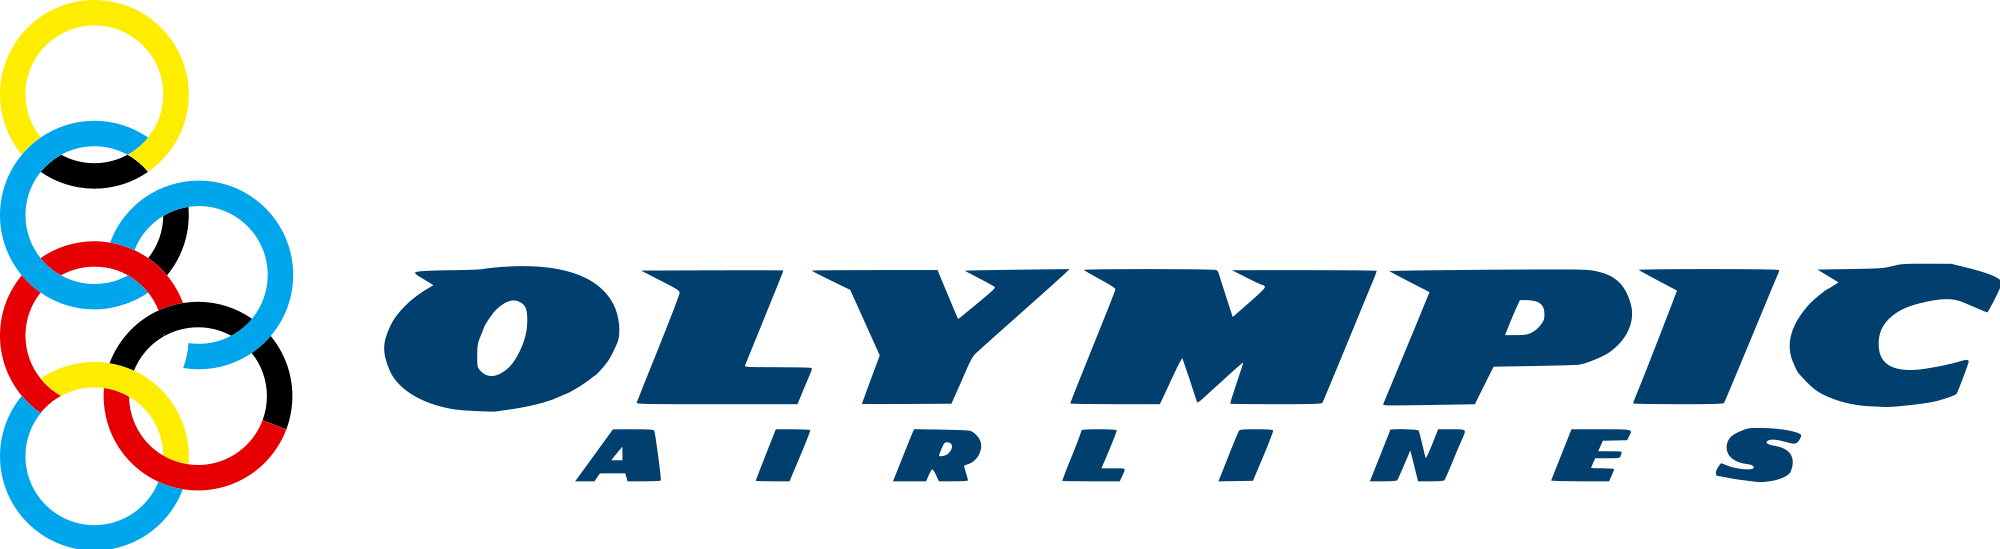 Greek Airline Logo - Olympic Airlines logo.png